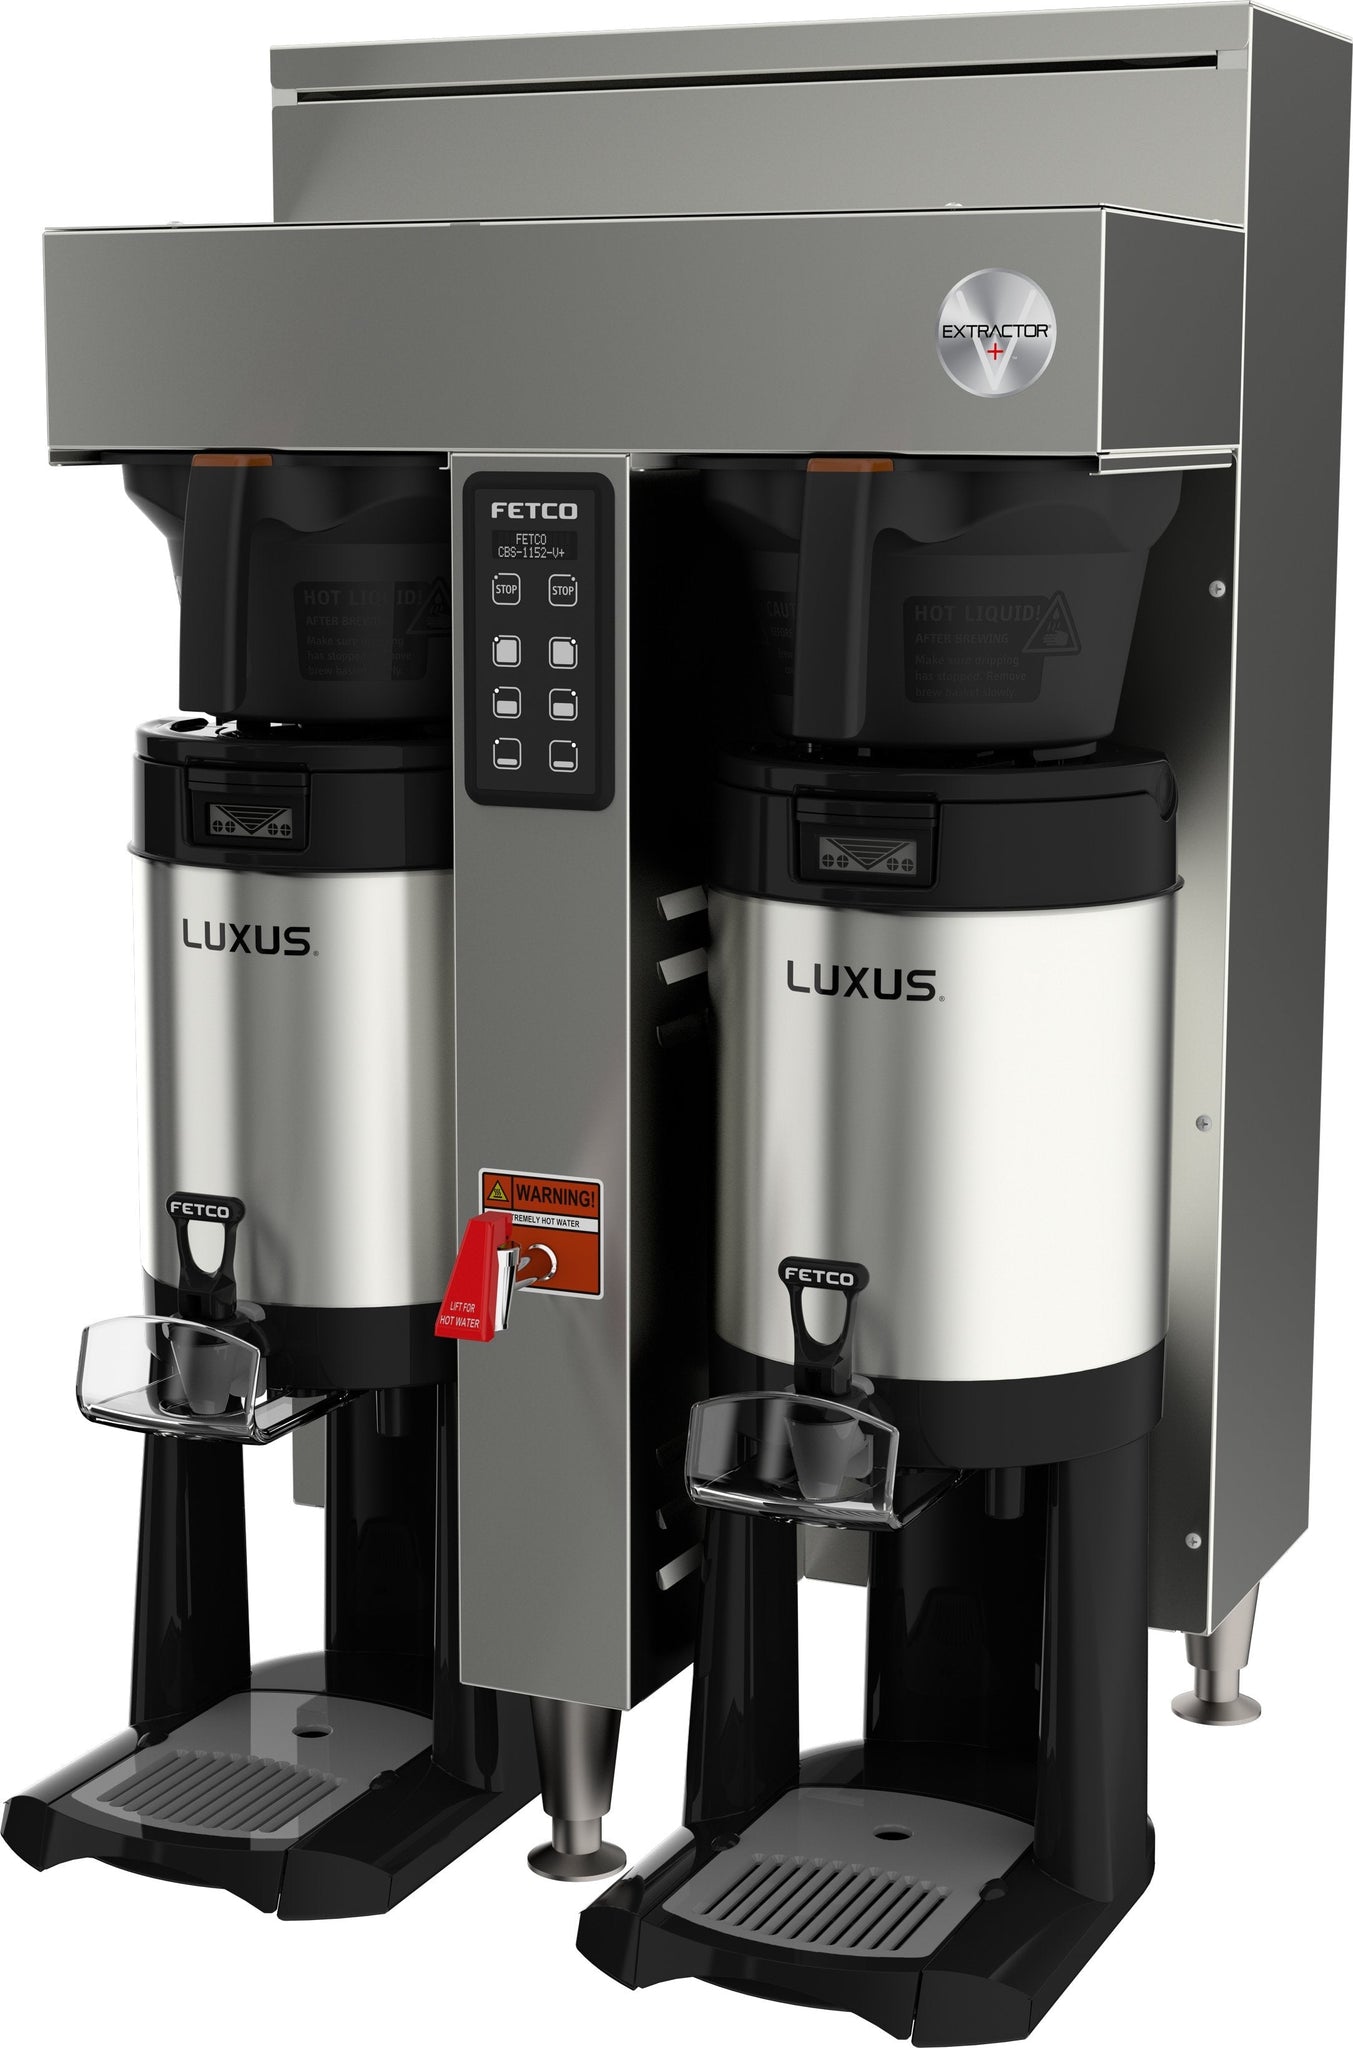 Fetco - Extractor Series Double Station Coffee Brewer 3 x 3.0 kW with Bypass Valve &Metal Brew Basket - CBS-1152V+